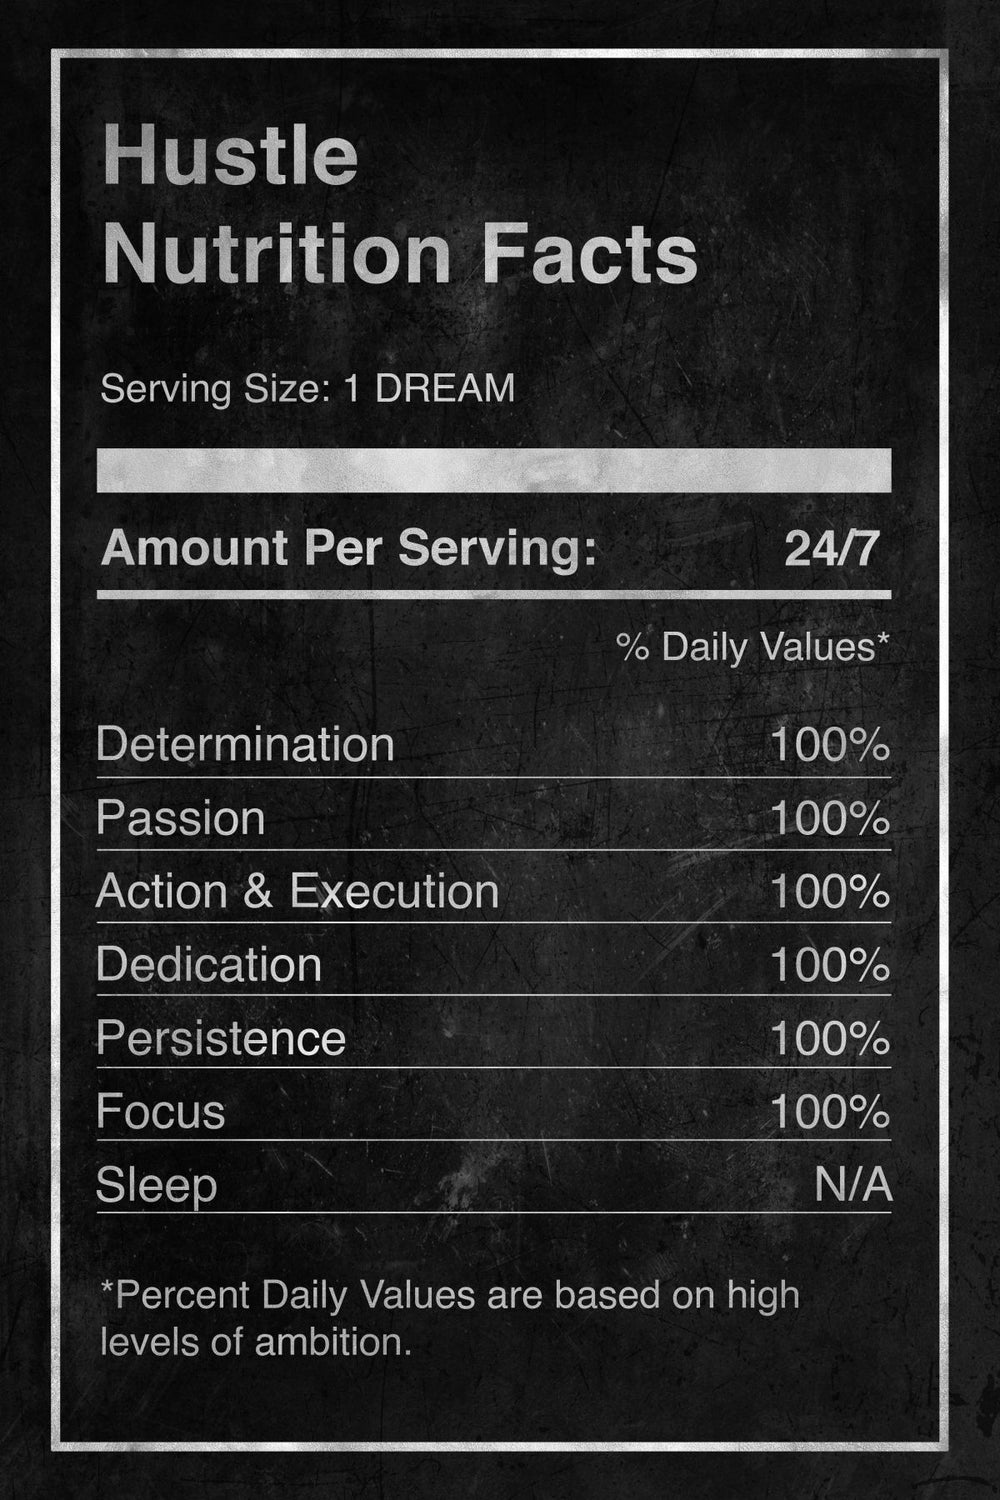 Hustle Nutrition Facts Grunge Typography